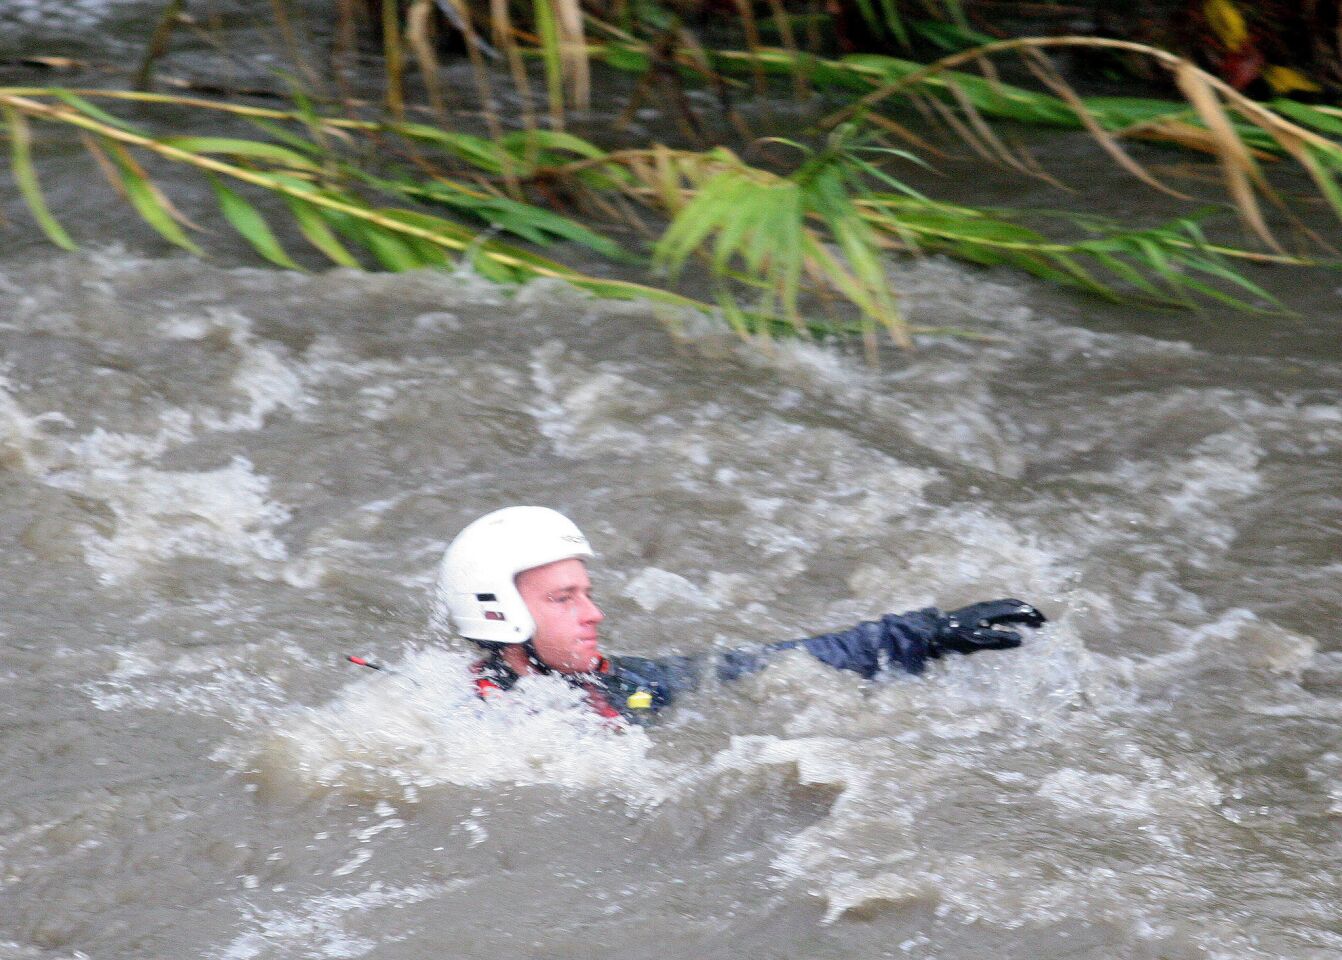 An L.A. Fire Department urban search and rescue team member floats down the L.A. River after his line snapped as he tried to swim to an island in the Atwater Village area during rescue operations Friday. Firefighters downriver pulled him to safety.